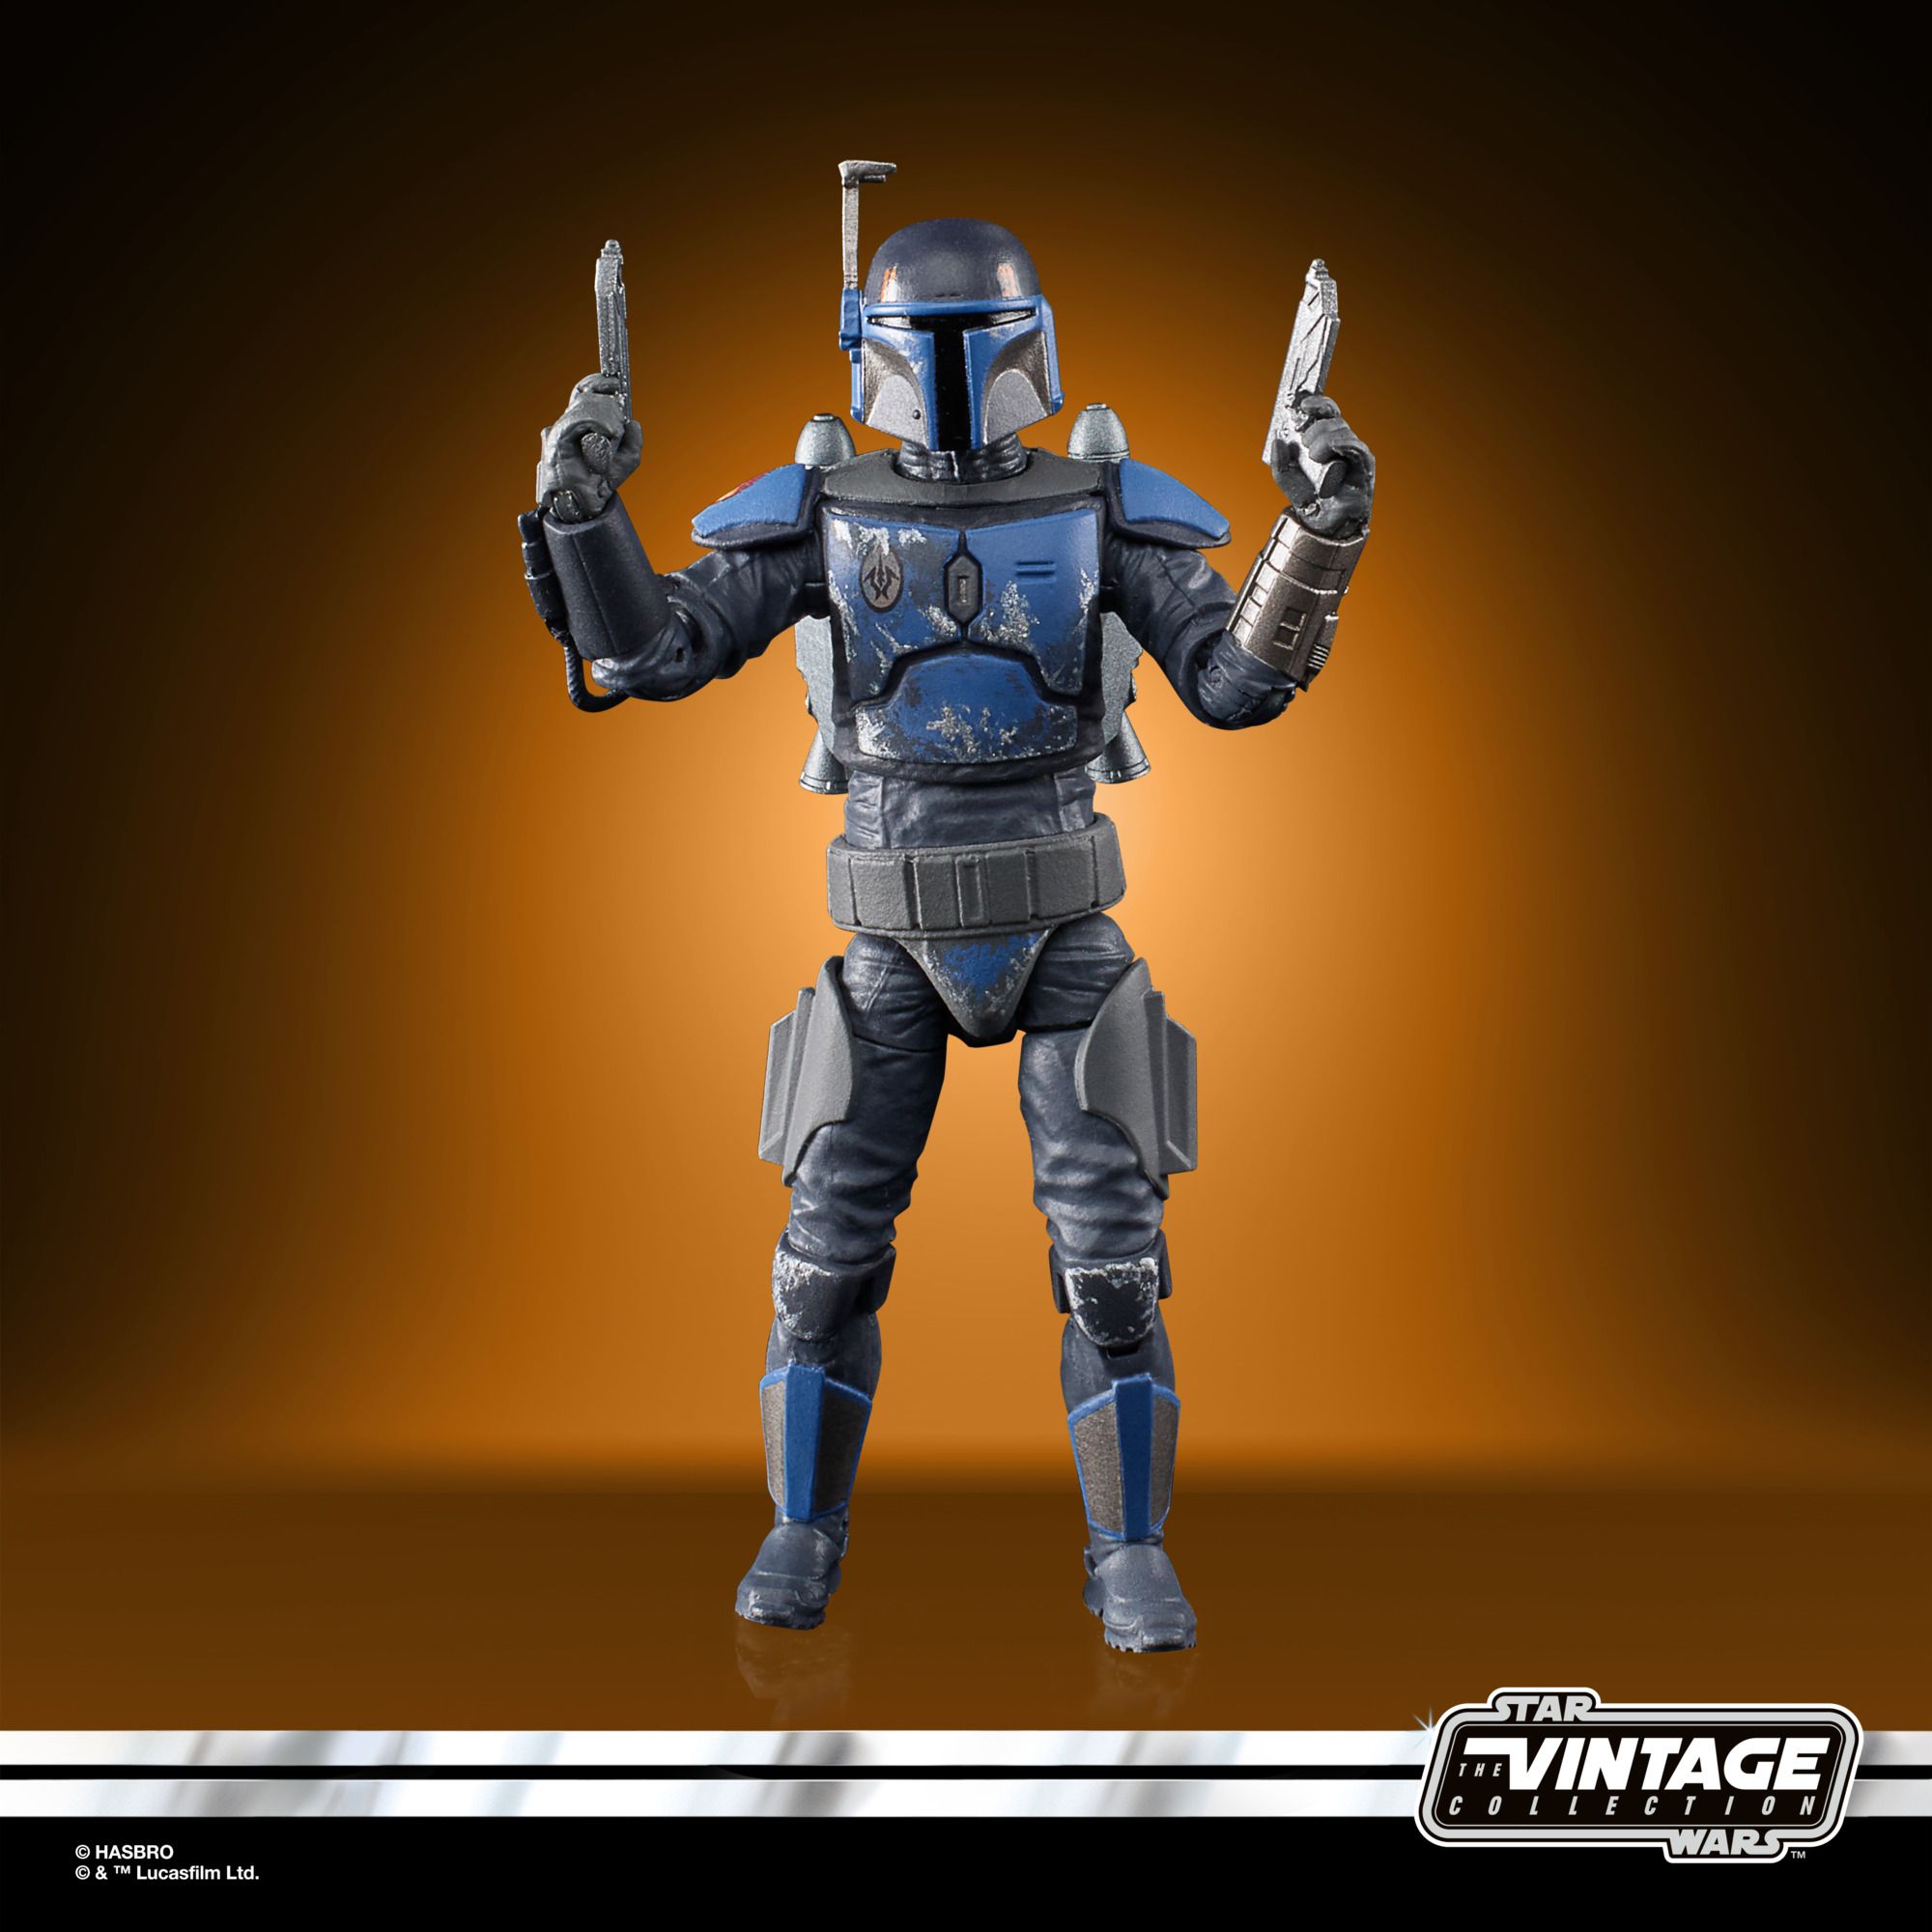 STAR WARS THE VINTAGE COLLECTION 3.75-INCH MANDALORIAN DEATH WATCH AIRBORNE TROOPER Figure 1